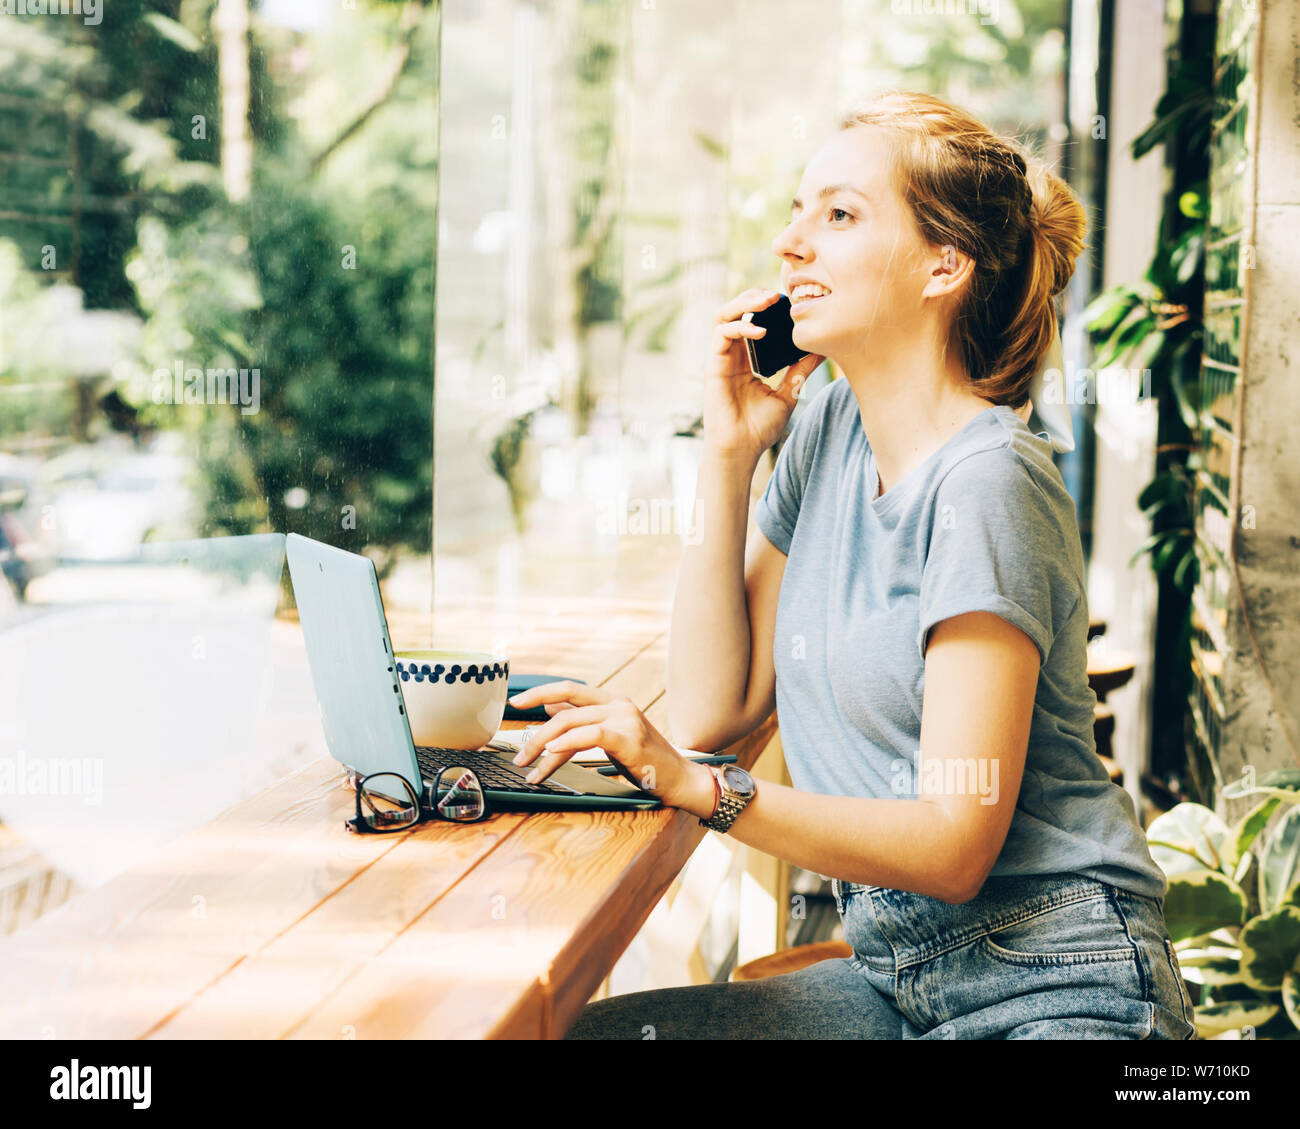 girl in a cafe with a laptop talking on the phone Stock Photo